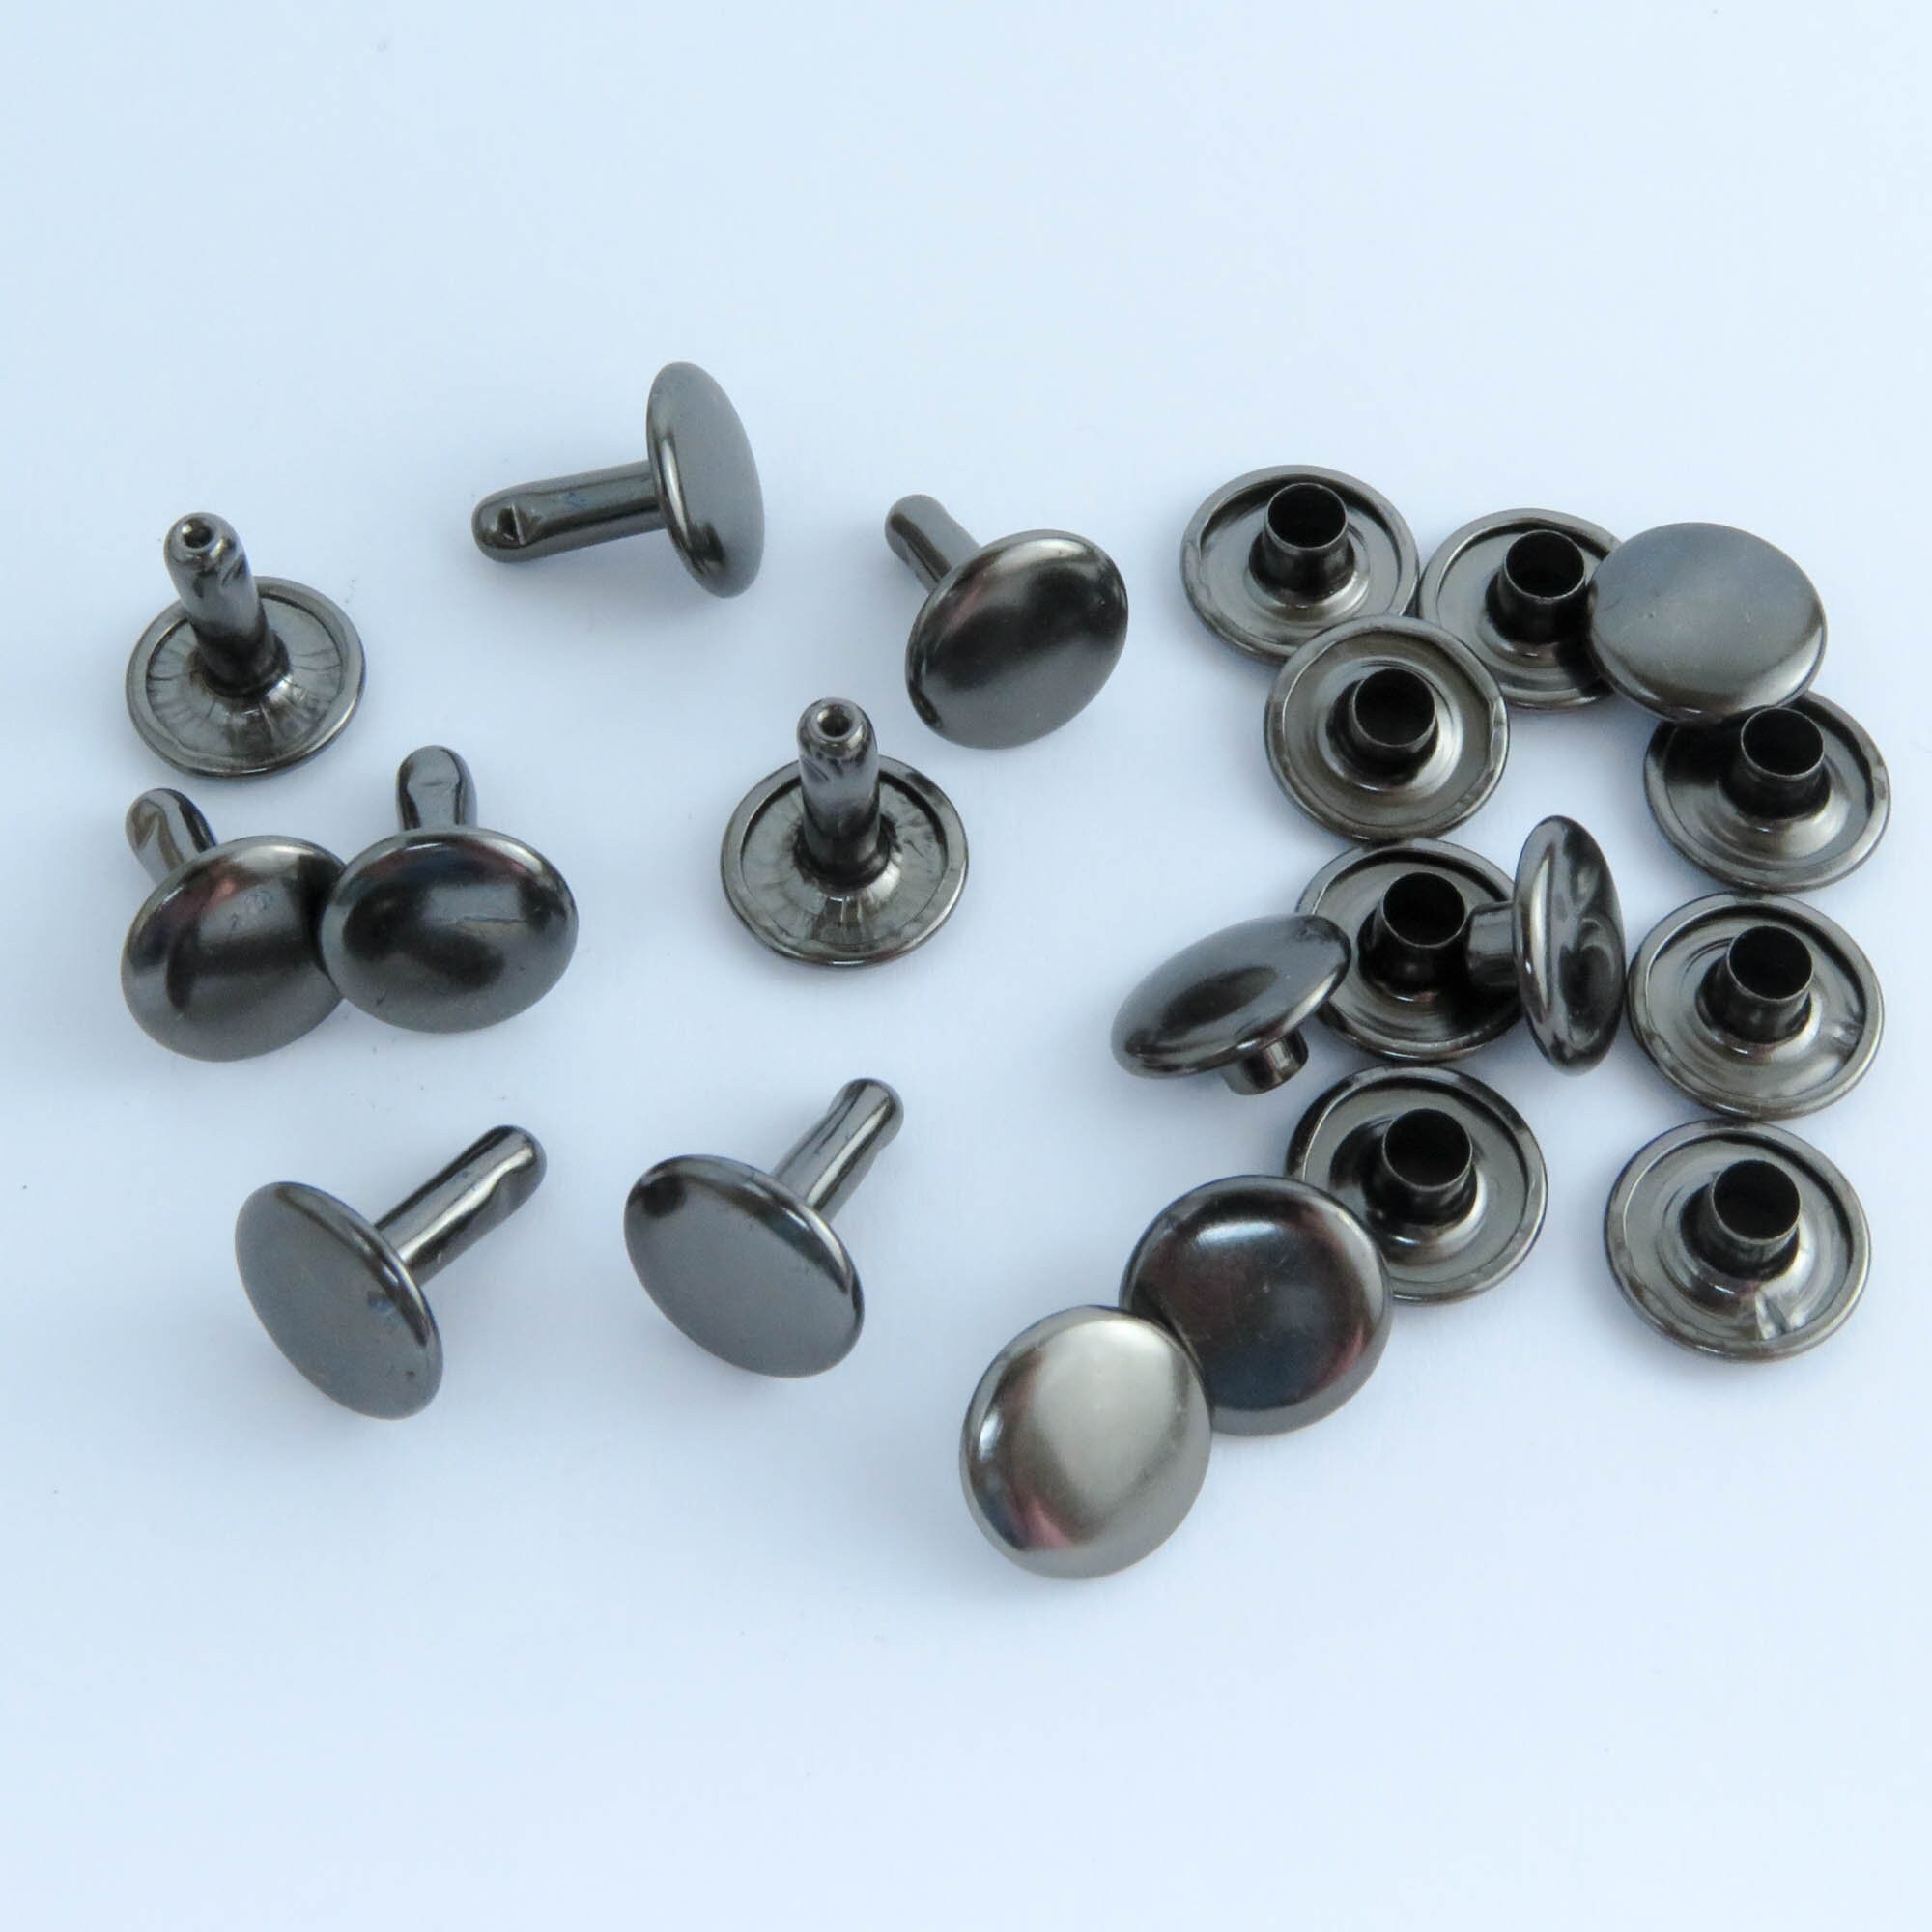 30 Mm Nickel Single Roller Buckles. Strong Buckles for Straps